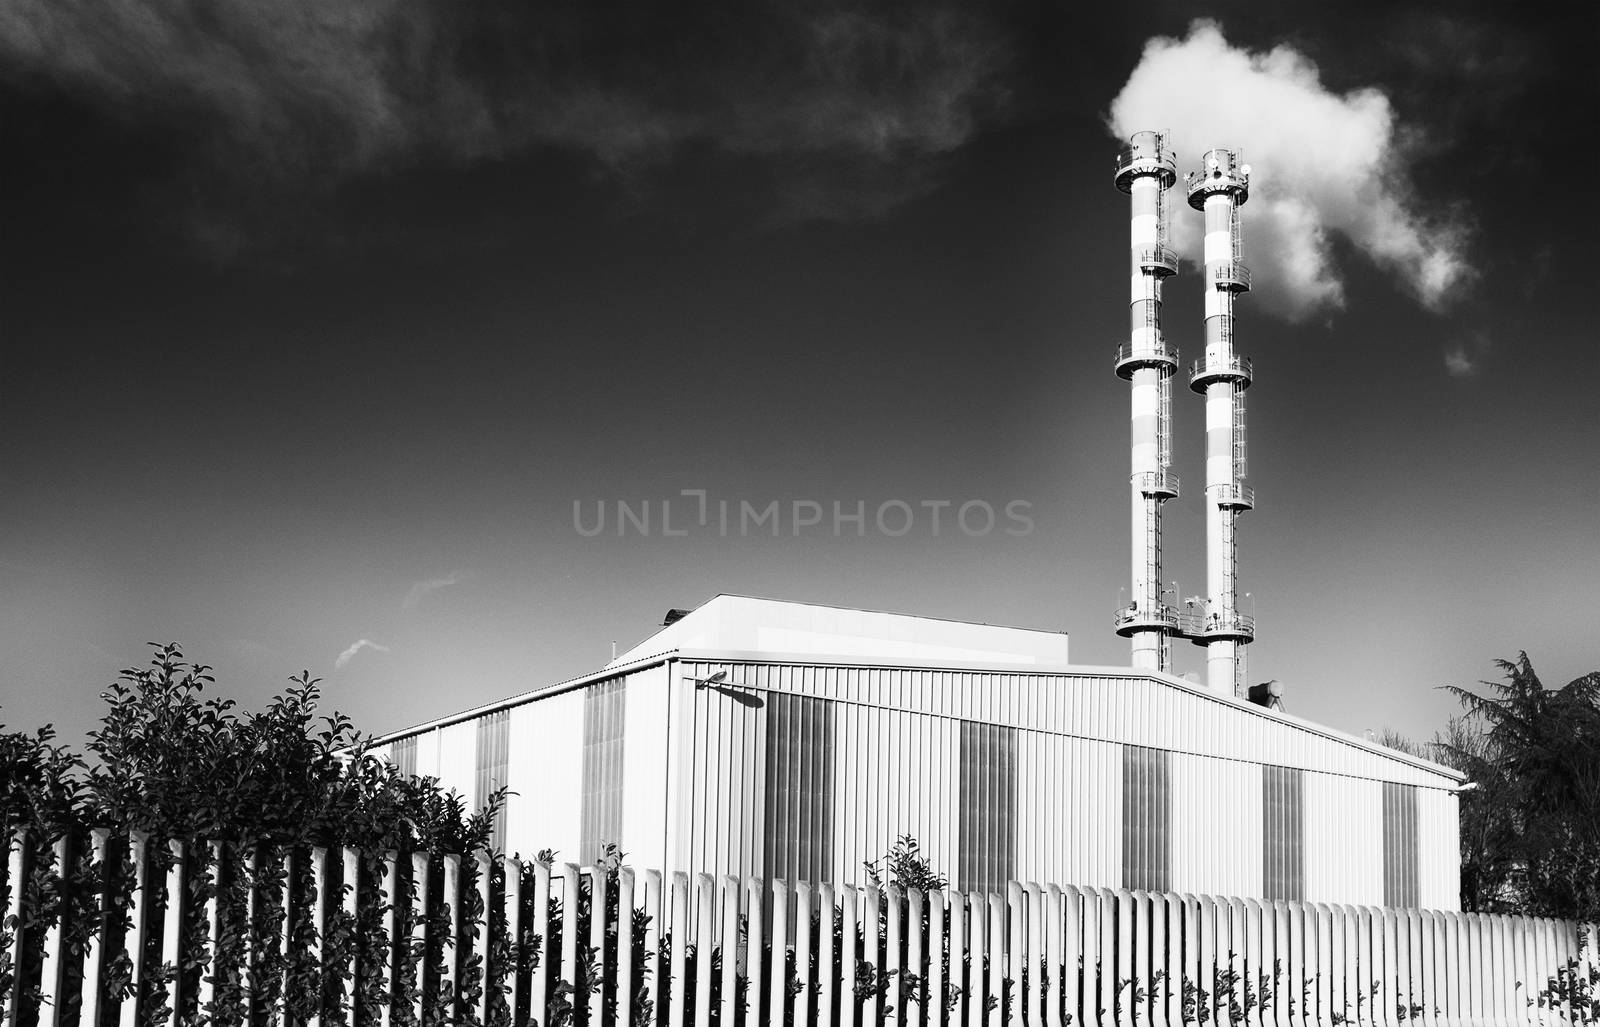 Black and White image of factory with smoke from pipes